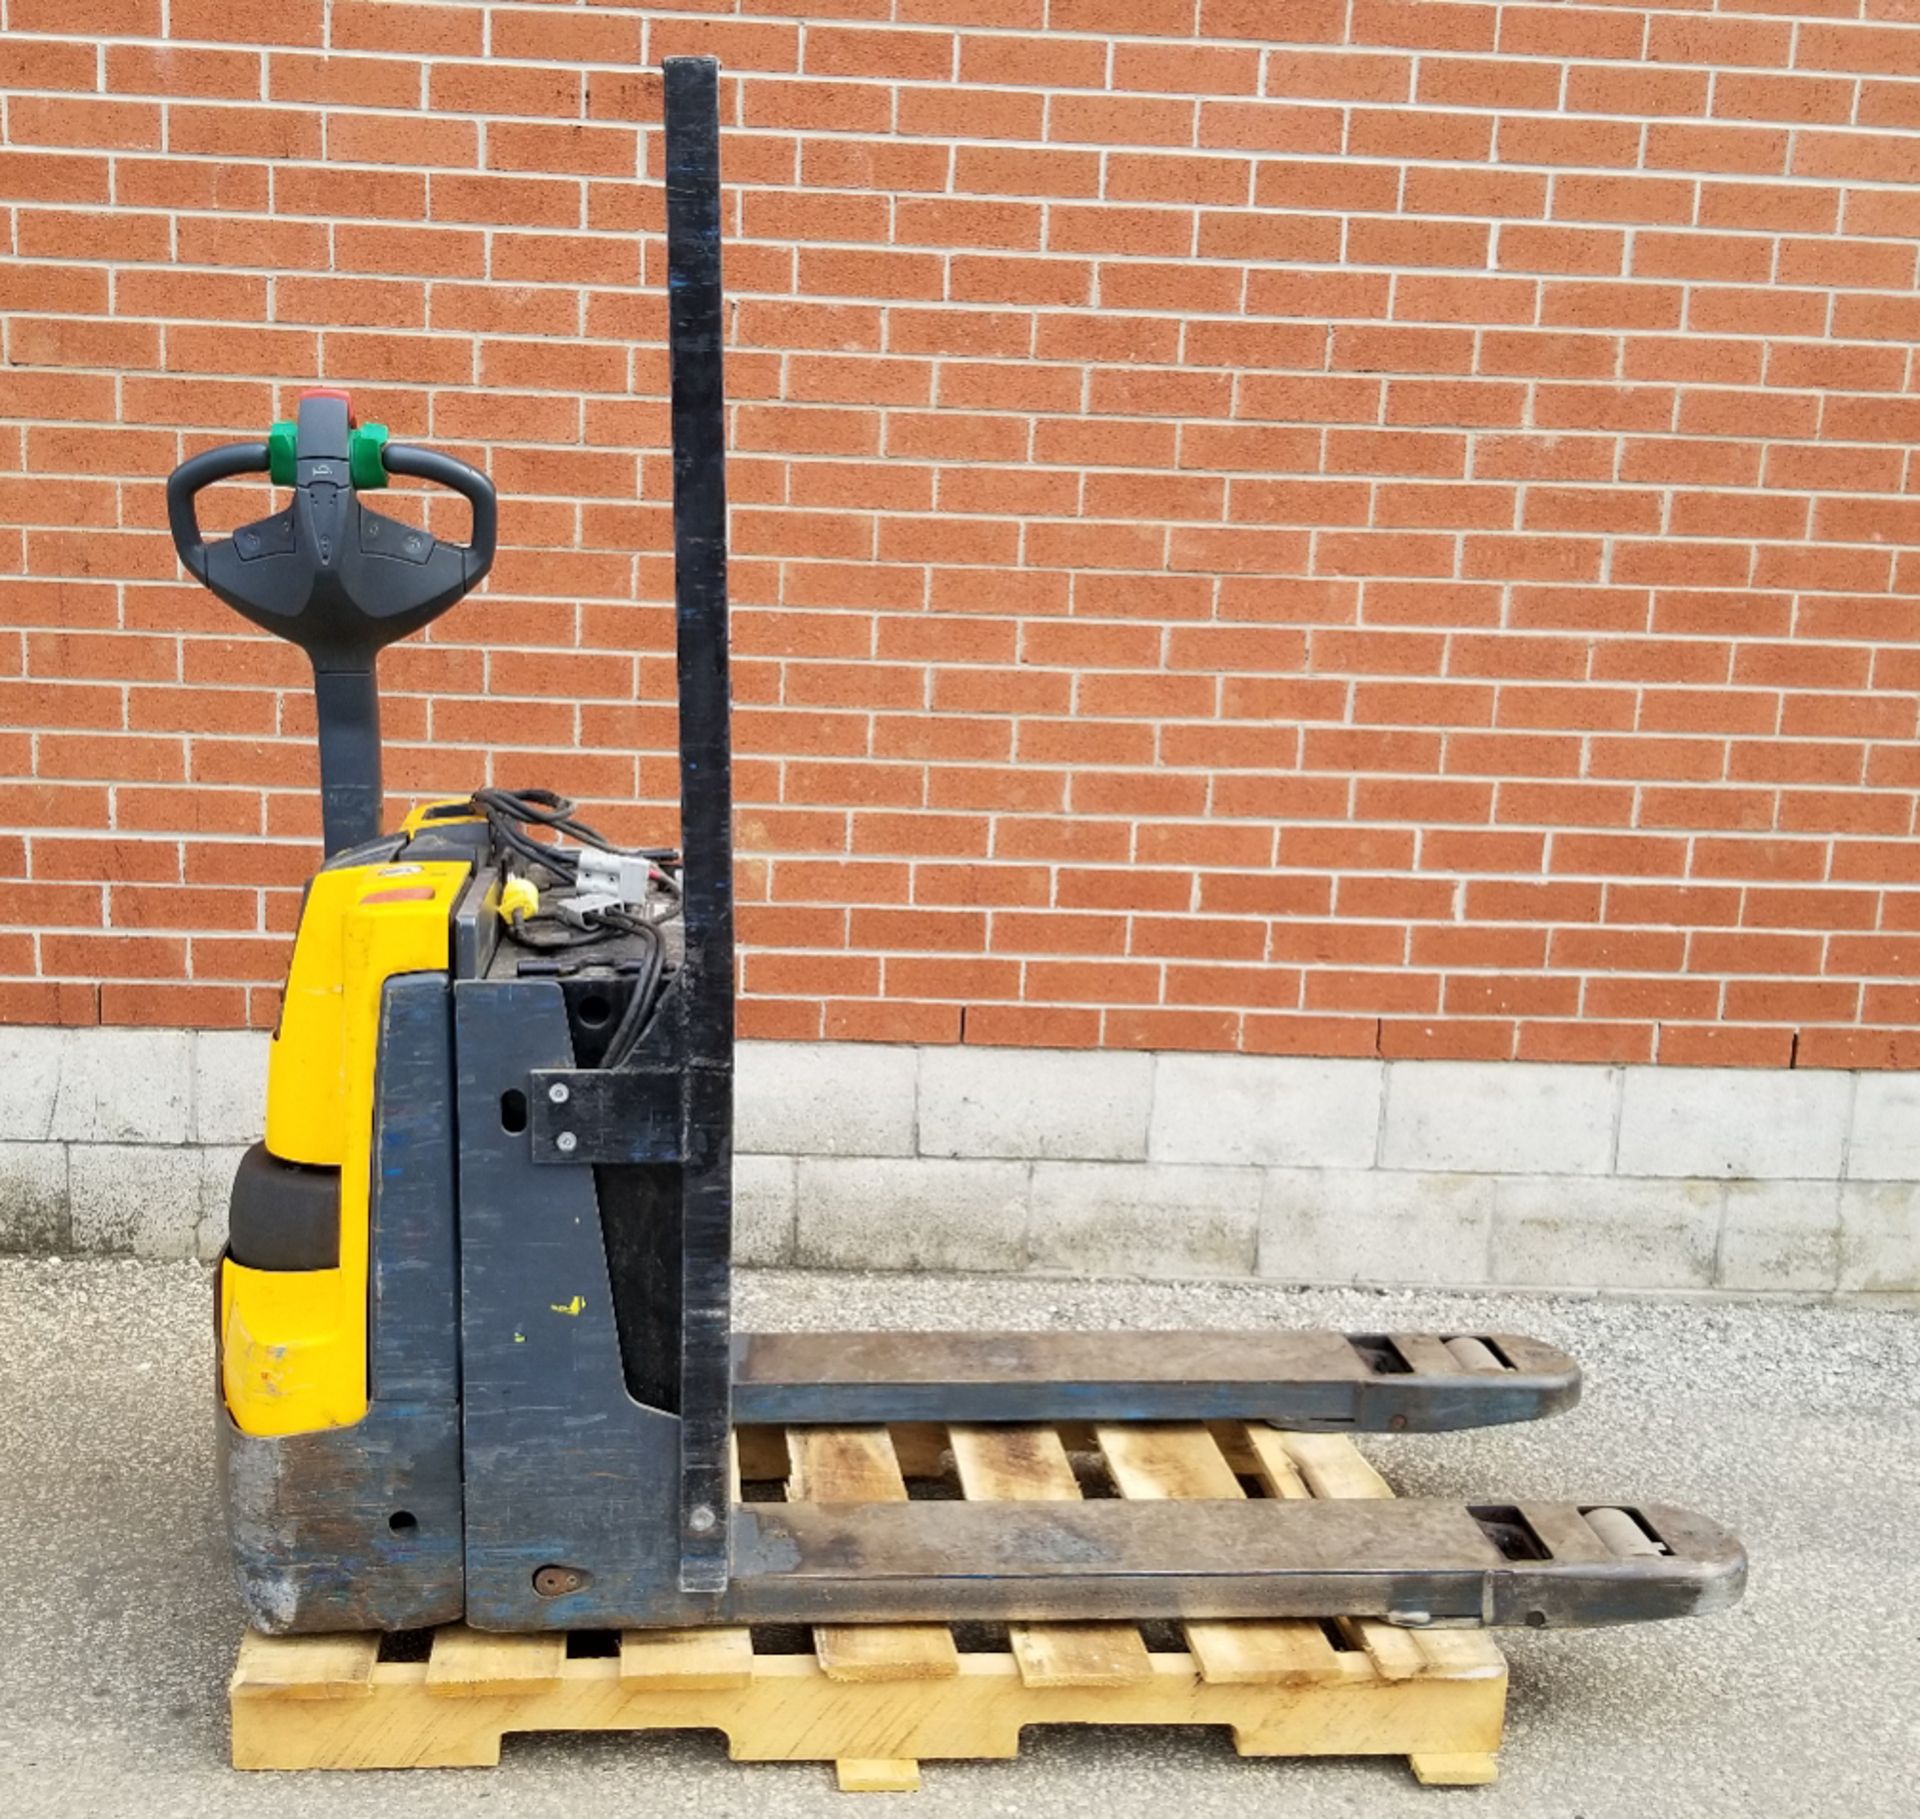 JUNGHEINRICH EJE-120 4500 LB. CAPACITY 24V WALK-BEHIND ELECTRIC PALLET JACK WITH CHARGER, S/N: